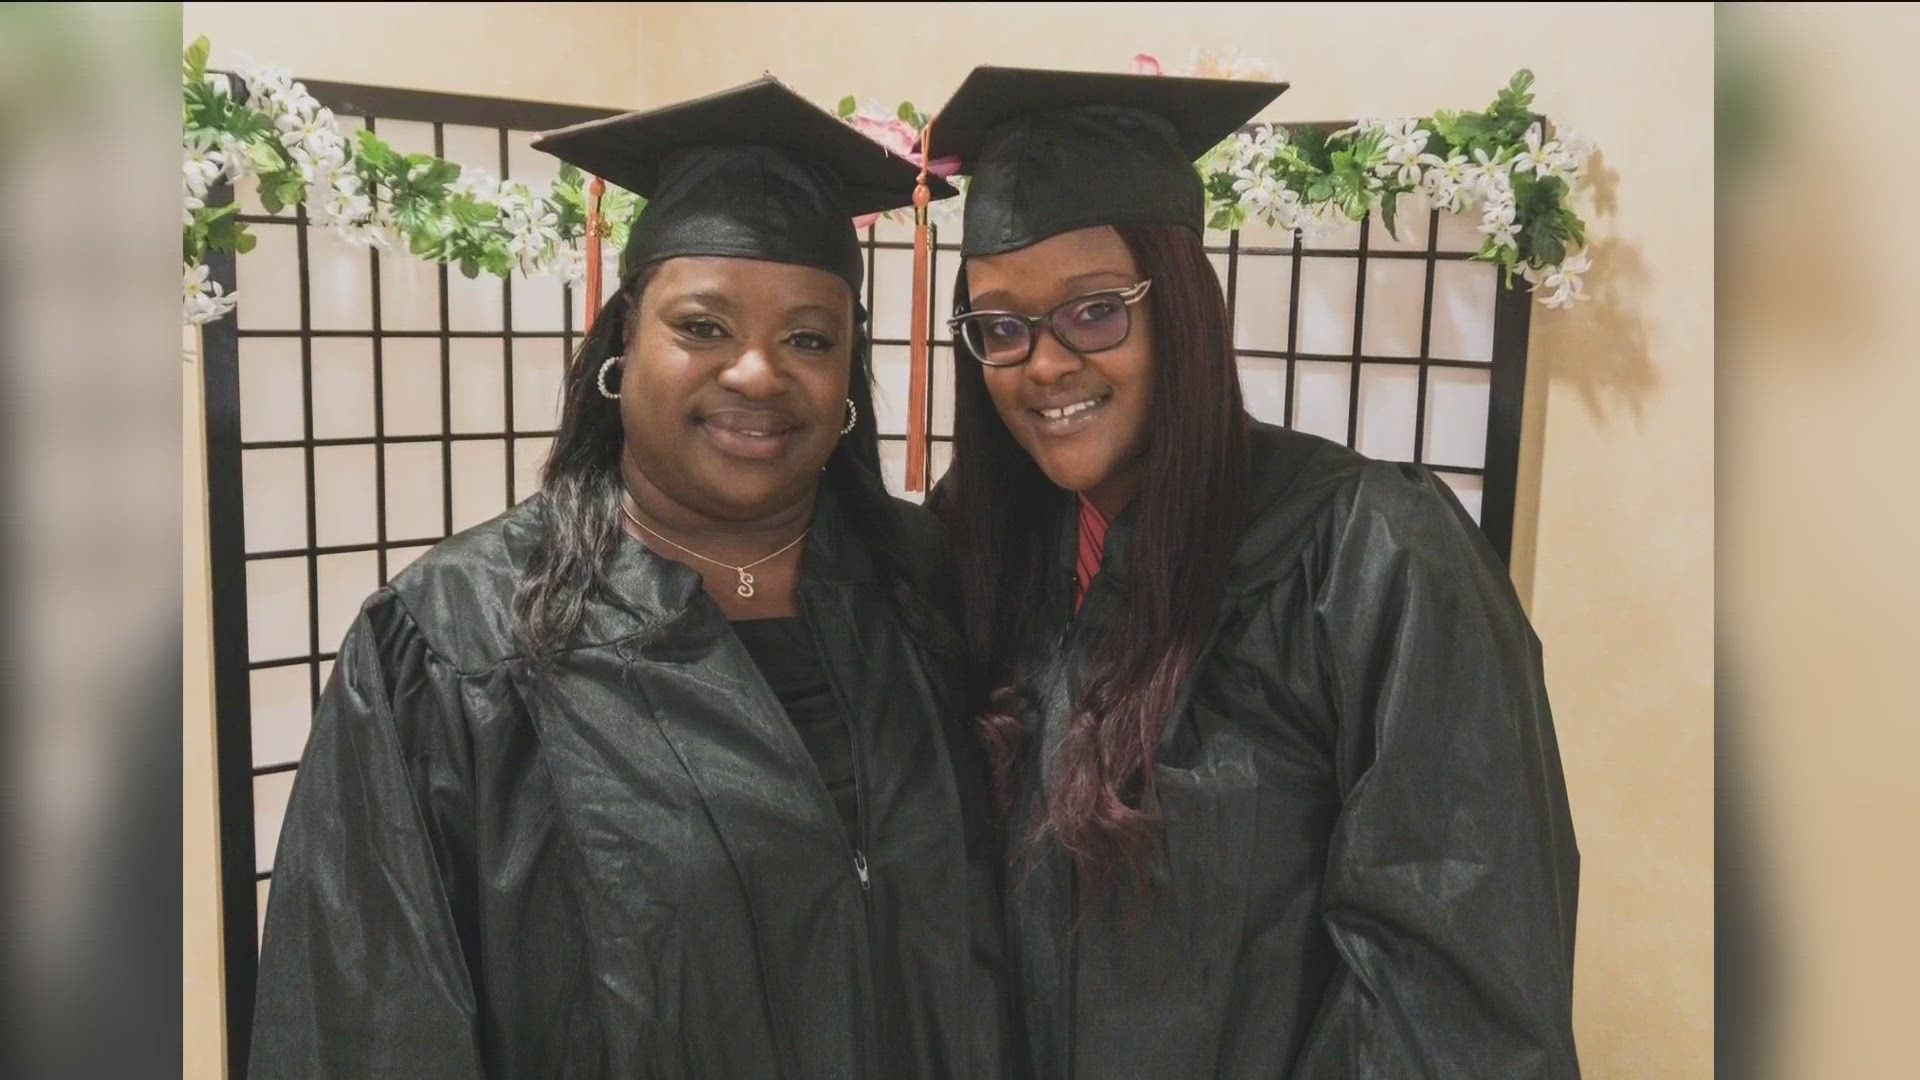 Detroit mother-daughter duo, Shalisa Davis and Mishay Davis both graduated from the Hondros College of Nursing this spring, helping each other along the way.